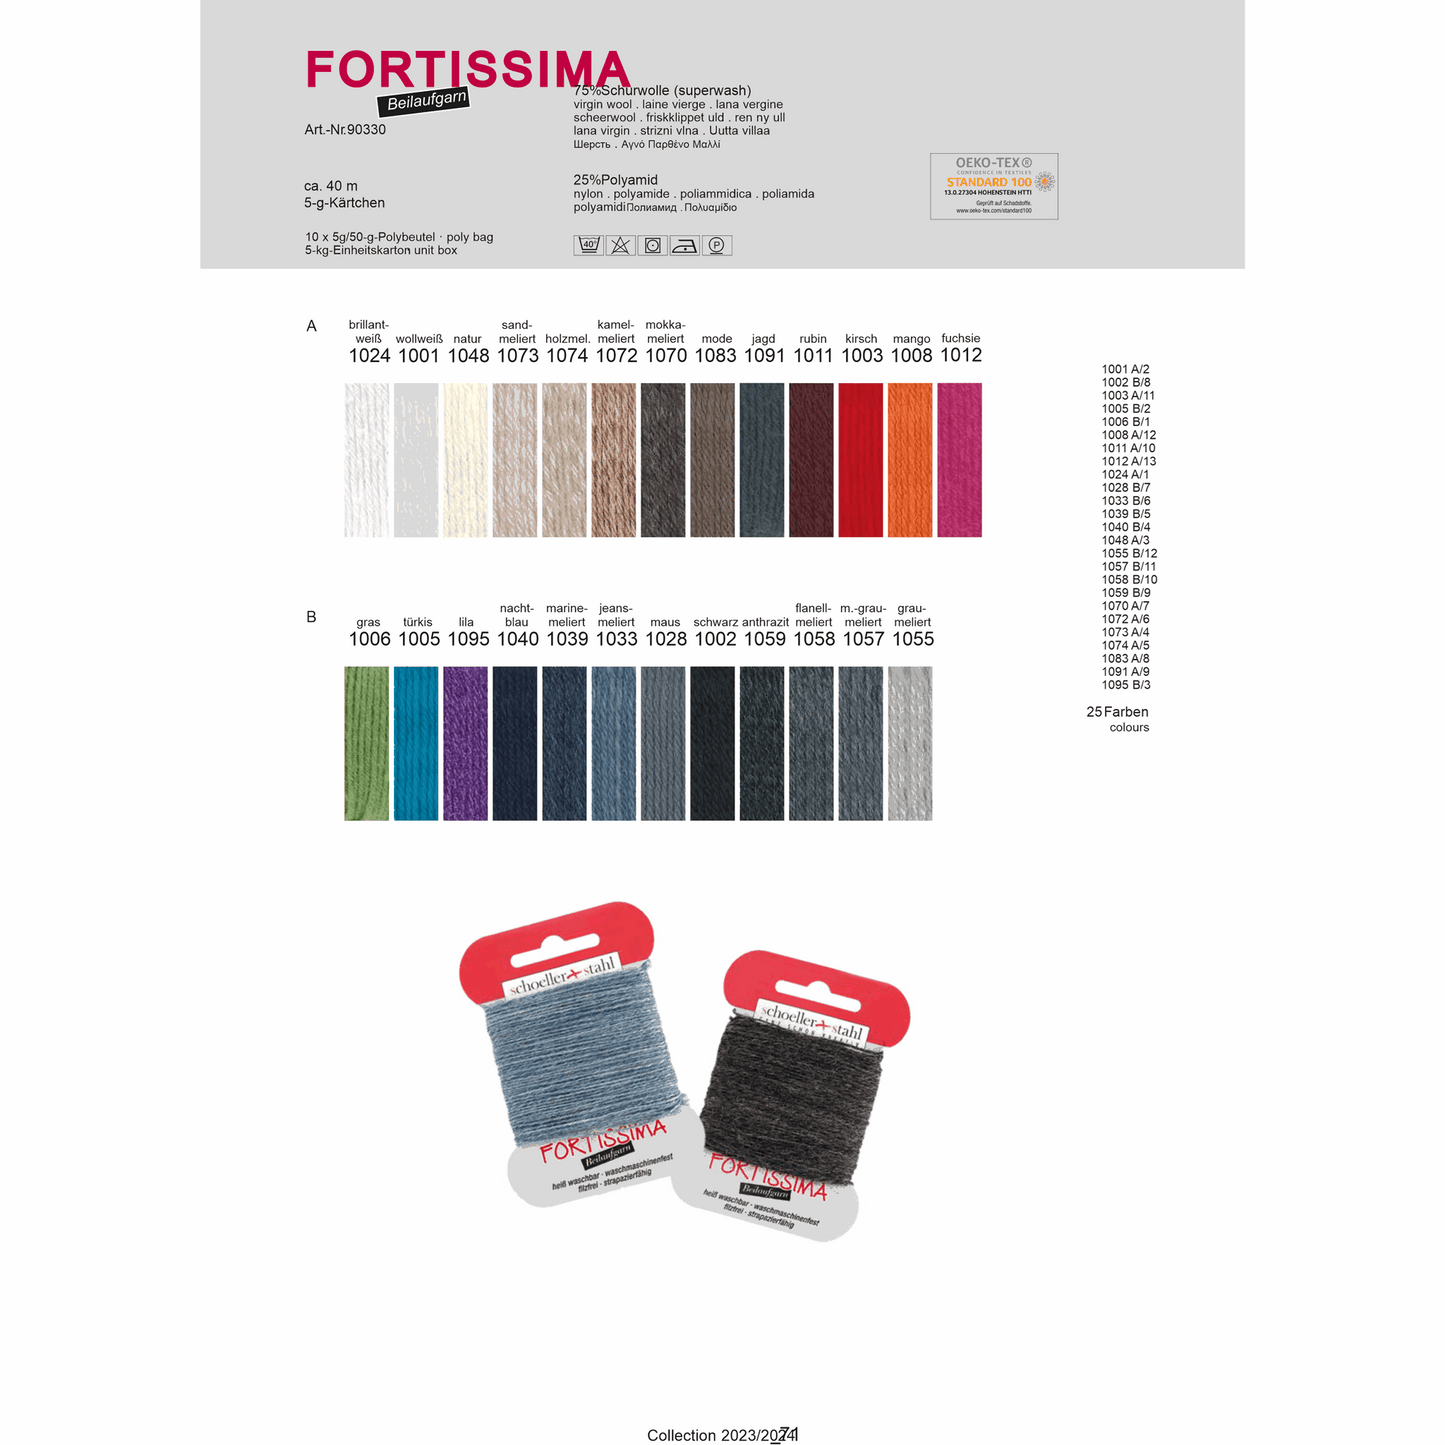 Fortissima thread 5g, 90330, color 1005, turquoise